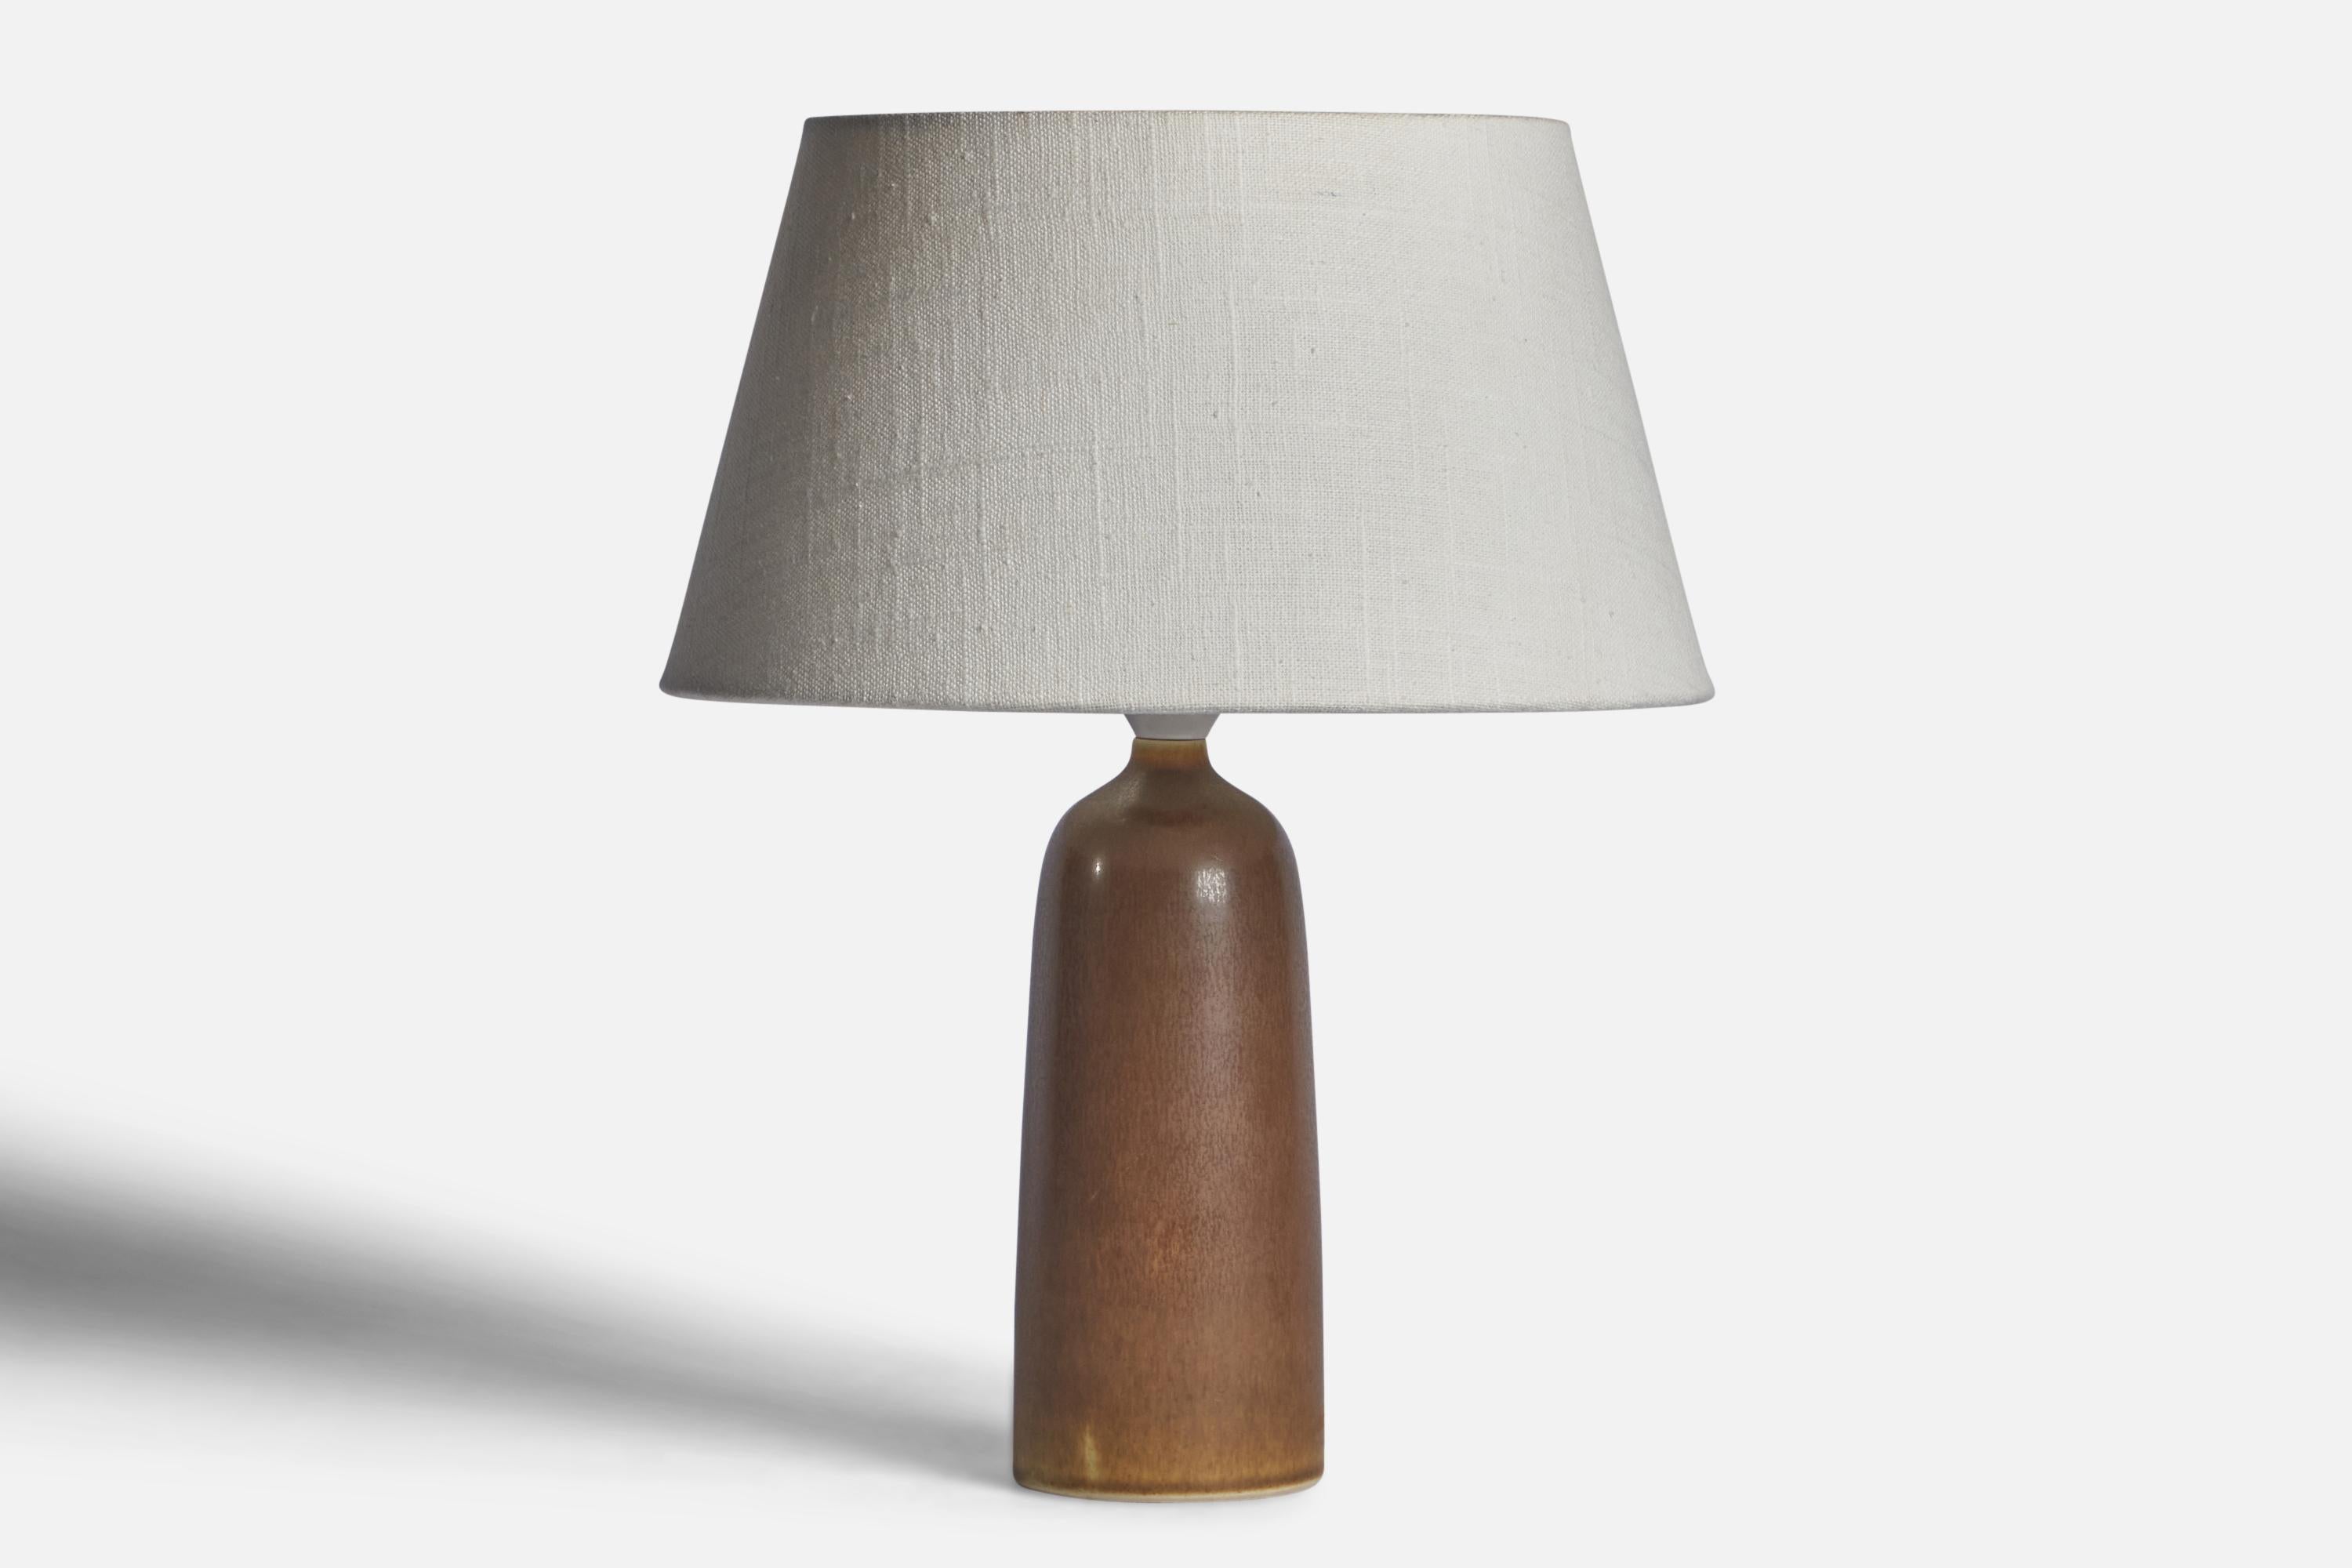 A brown-glazed stoneware table lamp designed by Per & Annelise Linneman-Schmidt and produced by Palshus, Denmark, 1960s

Dimensions of Lamp (inches): 10.25” H x 3” Diameter
Dimensions of Shade (inches): 7” Top Diameter x 10” Bottom Diameter x